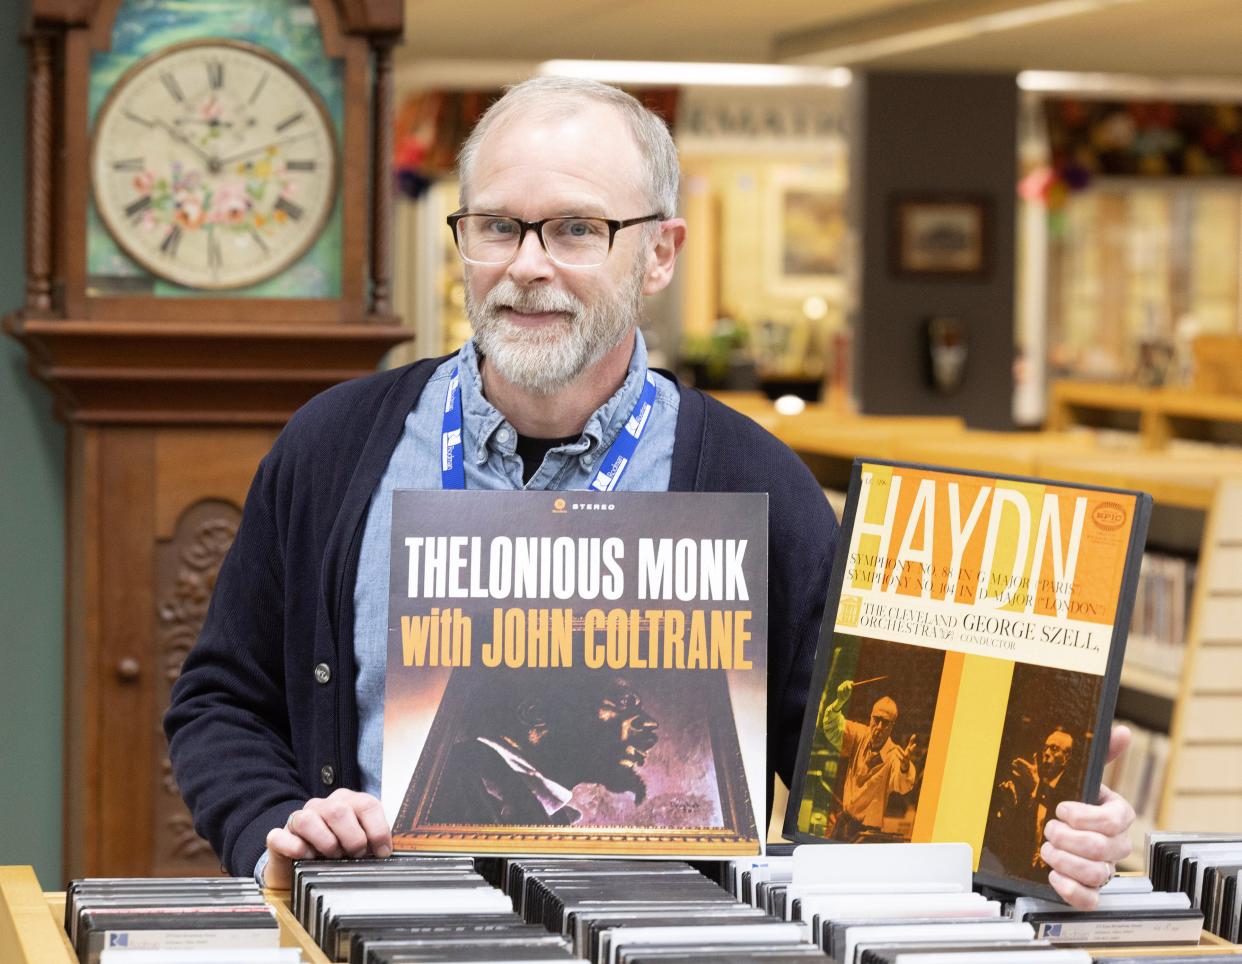 Byrun C. Reed, a reference librarian at the Rodman Public Library in Alliance, manages the Alliance Vinyl Club. Members enjoy listening and/or collecting vinyl records, and meet and talk about the music, records and artists.